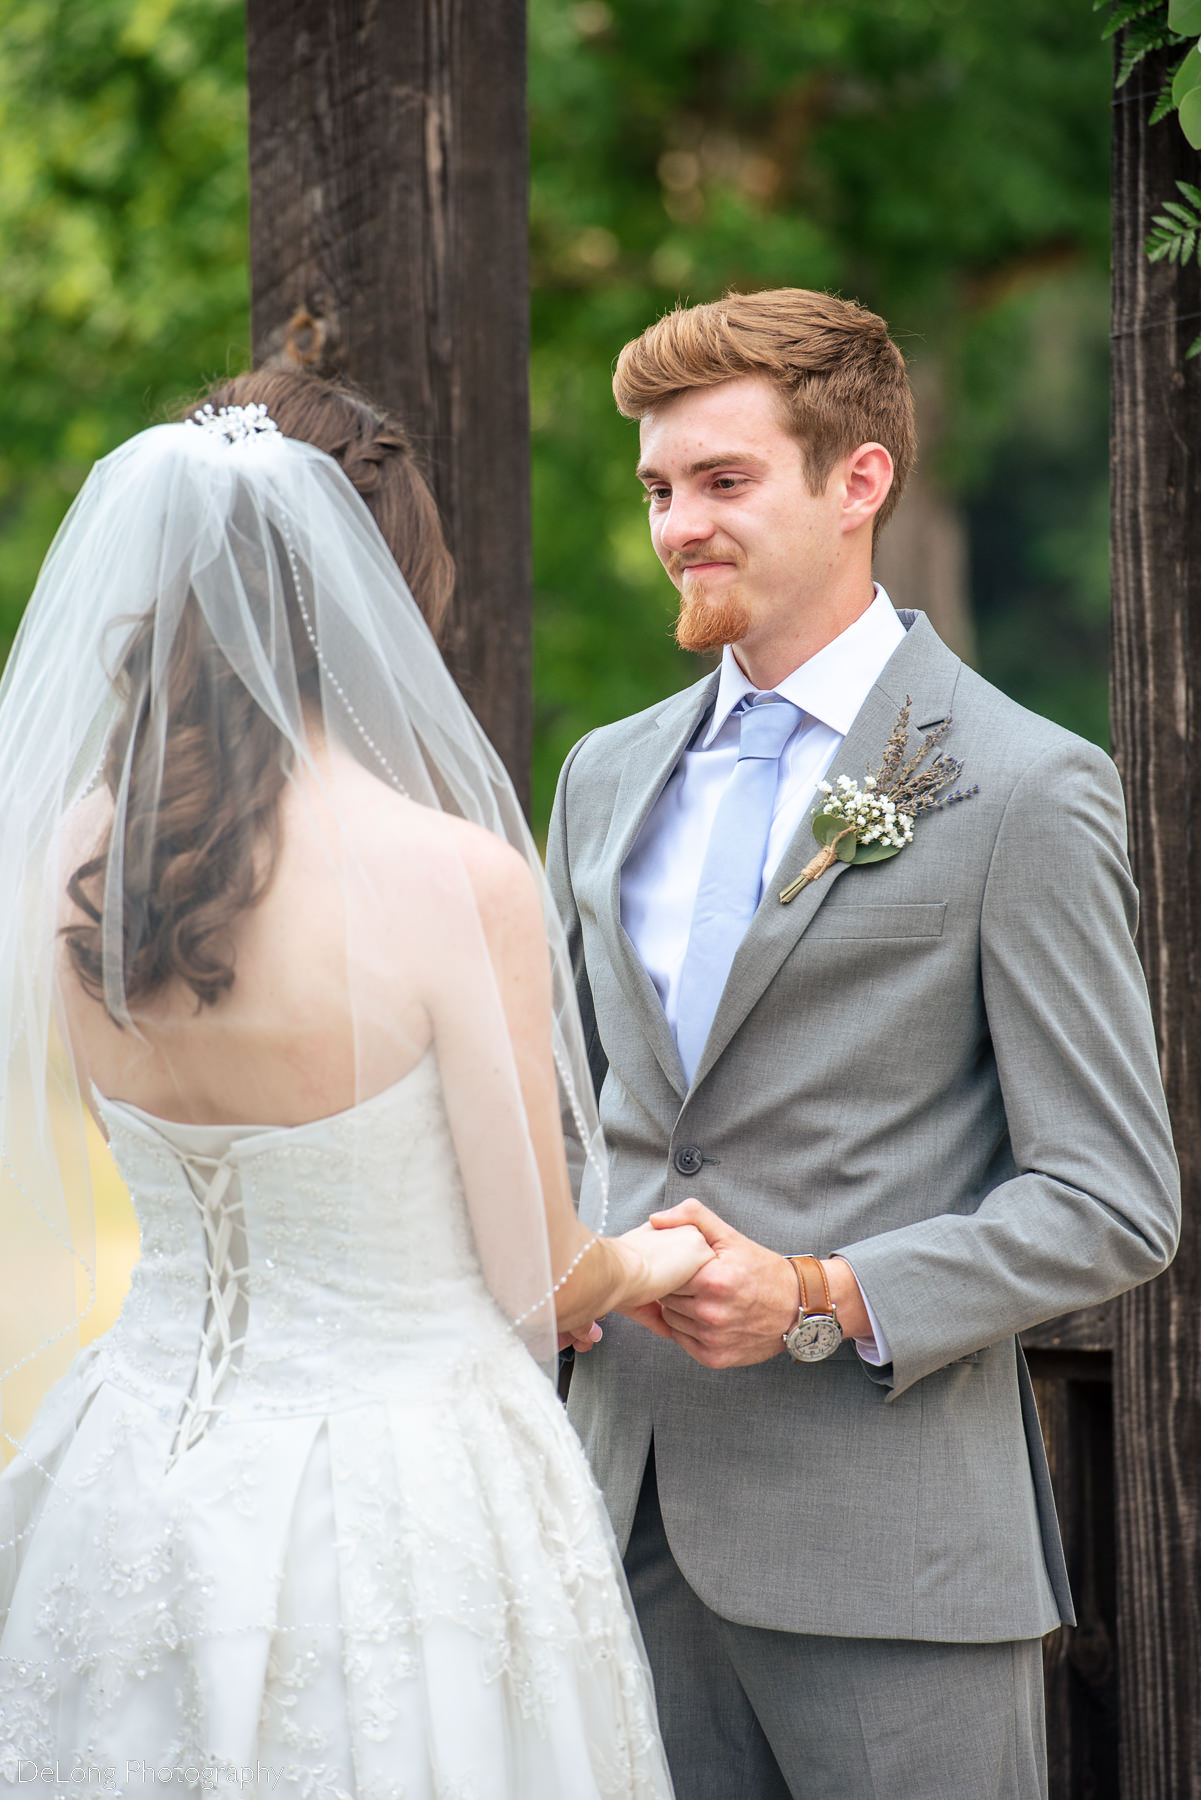 Emotional groom during wedding ceremony at Lady Bird Farms by Charlotte Wedding Photographers DeLong Photography